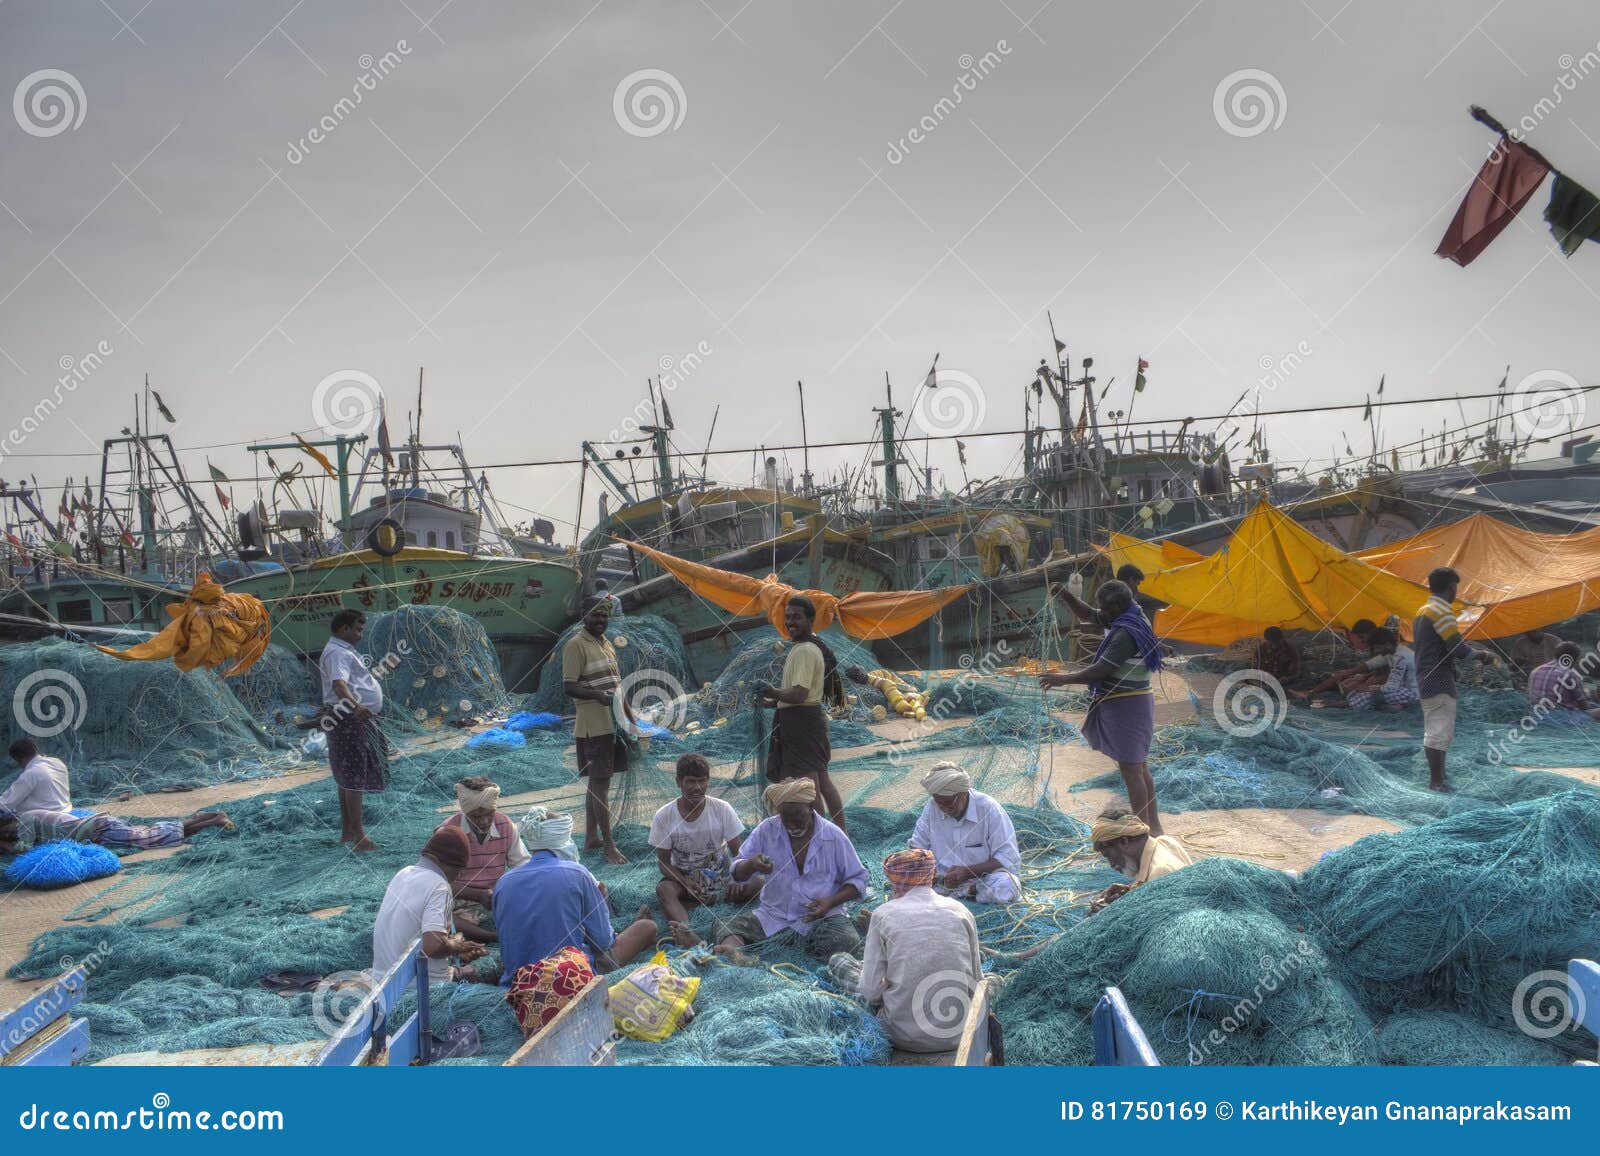 People making fishing net editorial stock image. Image of auction